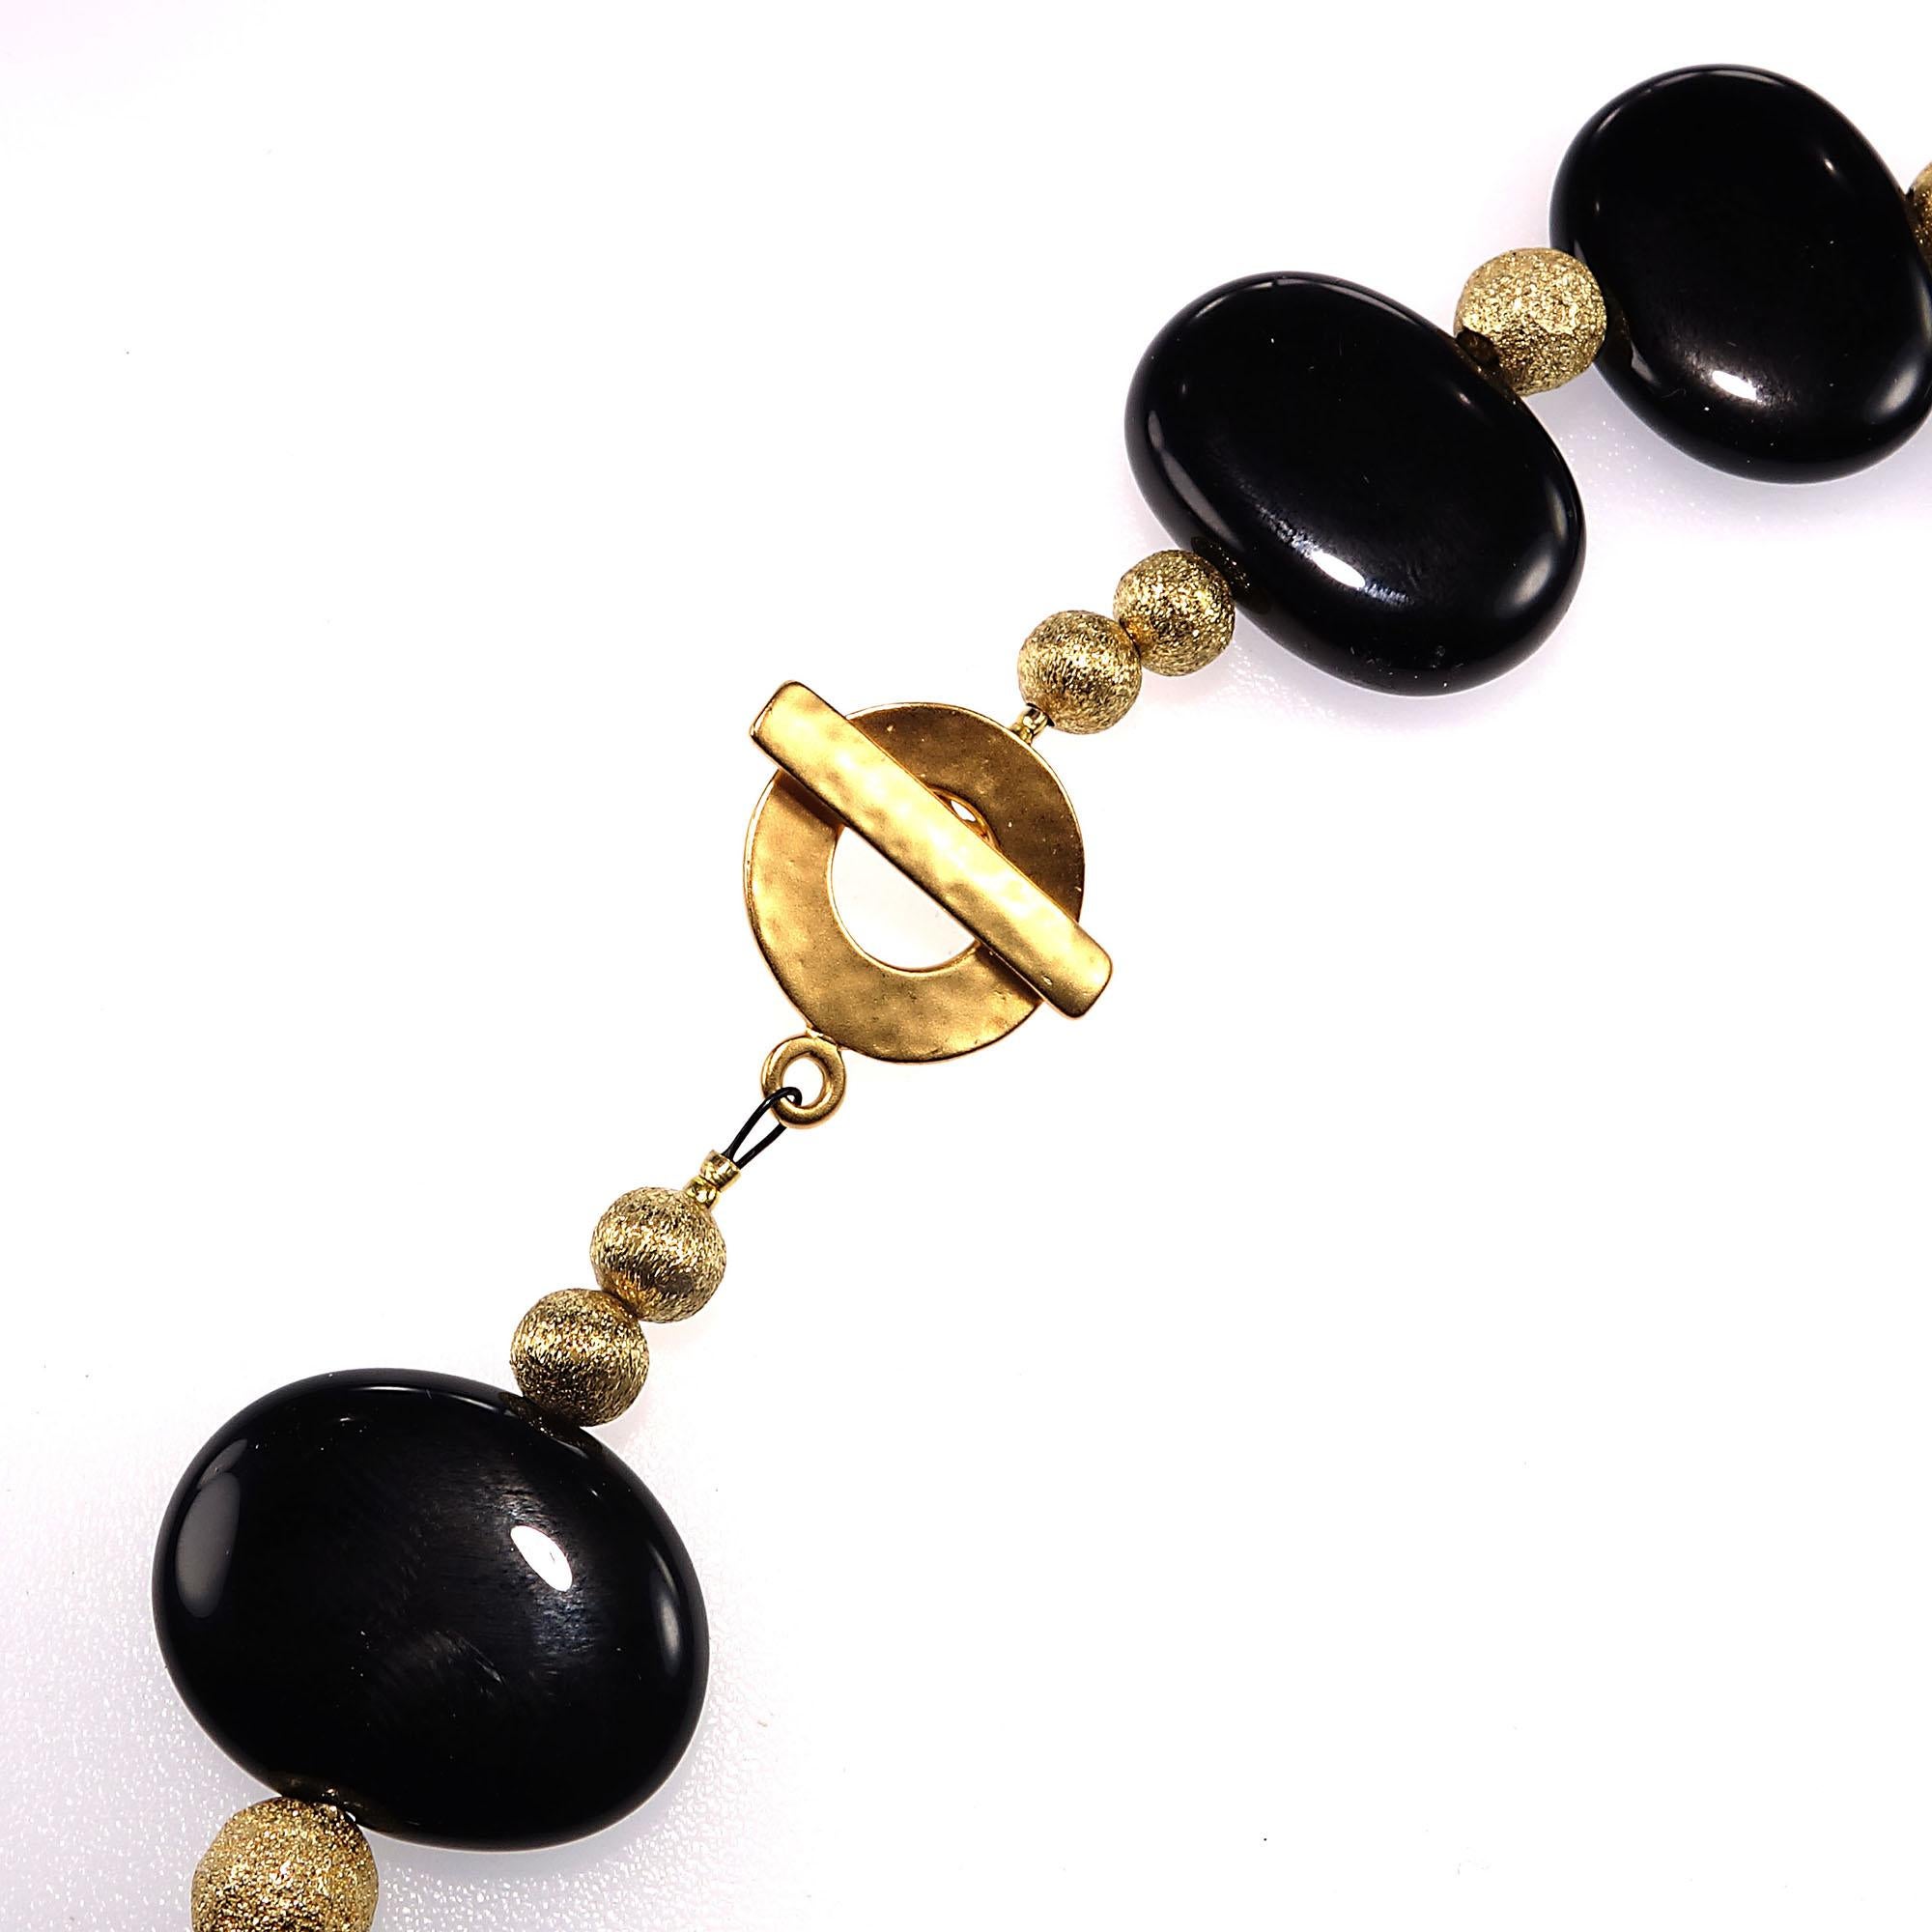 Women's or Men's Elegant Choker Necklace of Black Onyx with Gold Accents